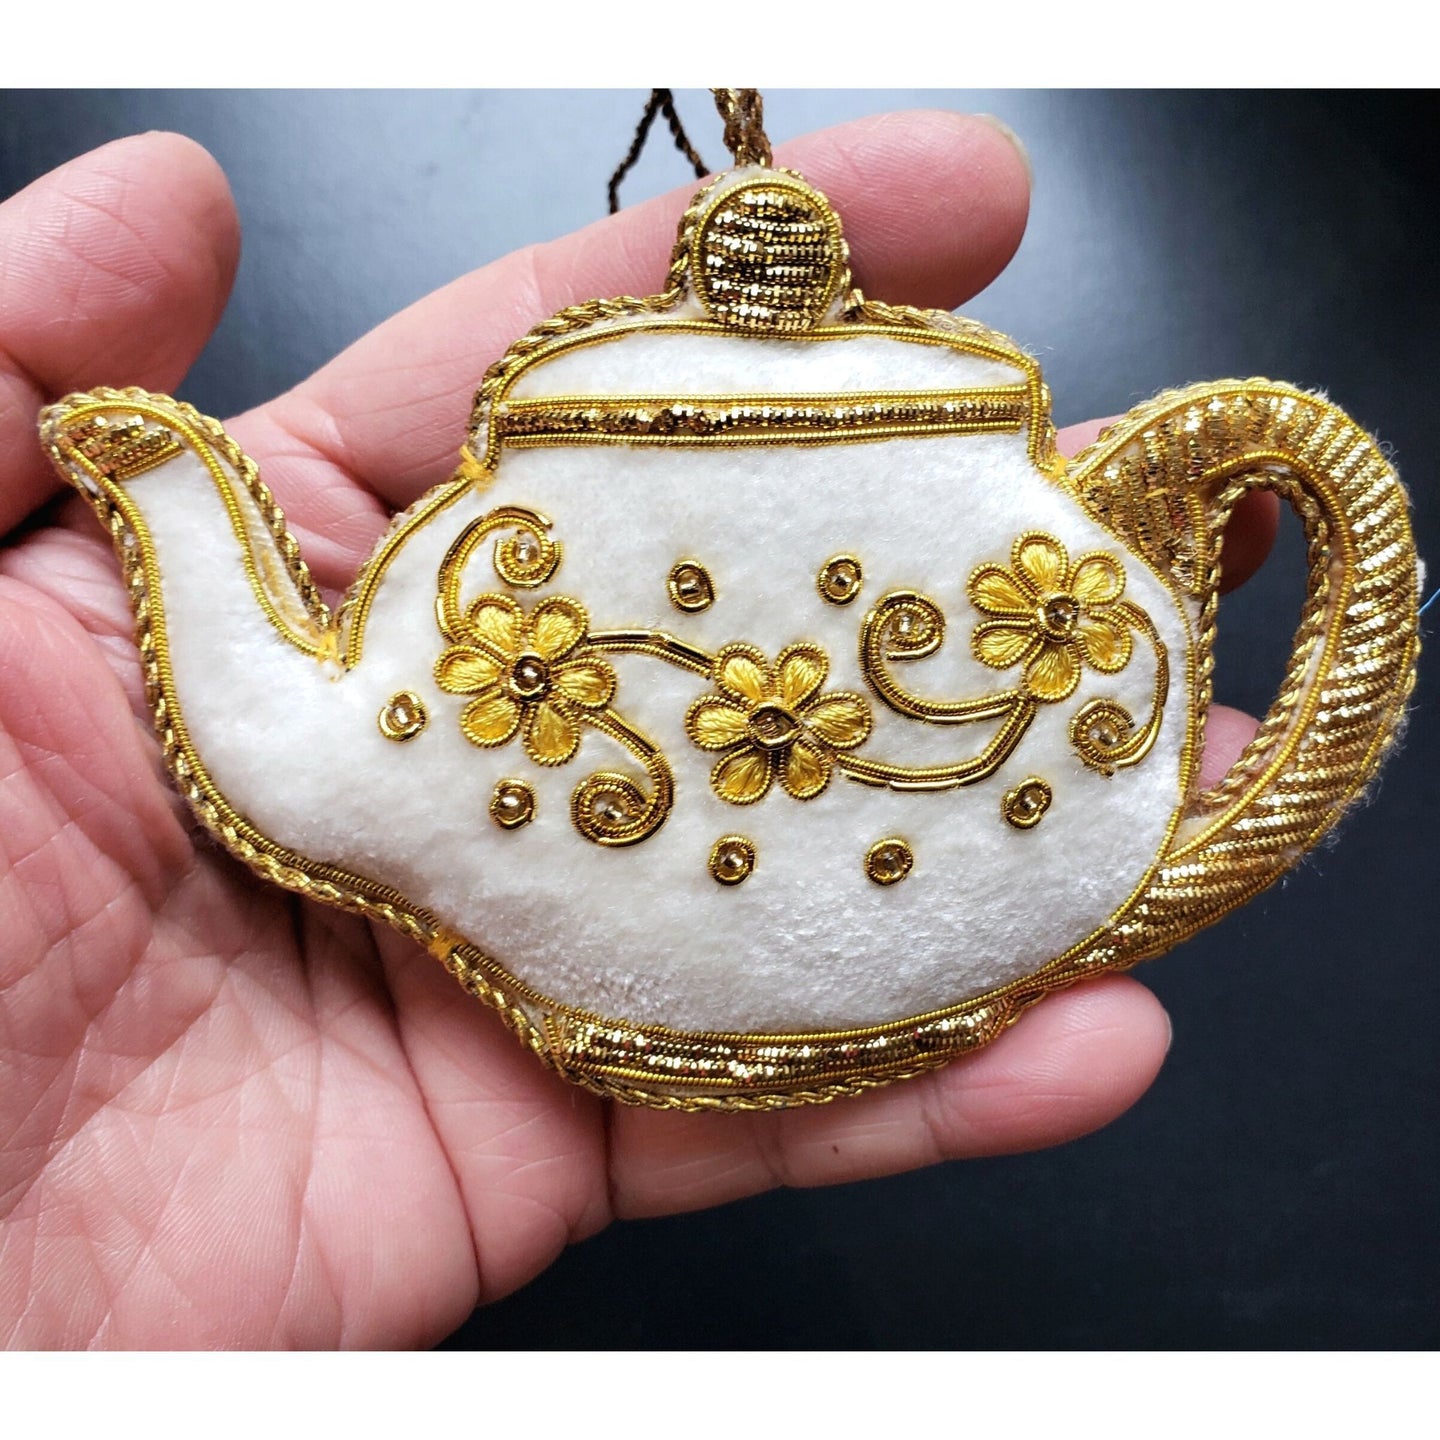 Tea pot Christmas ornament white velvet embroidered with gold flowers BoutiqueByMariam.